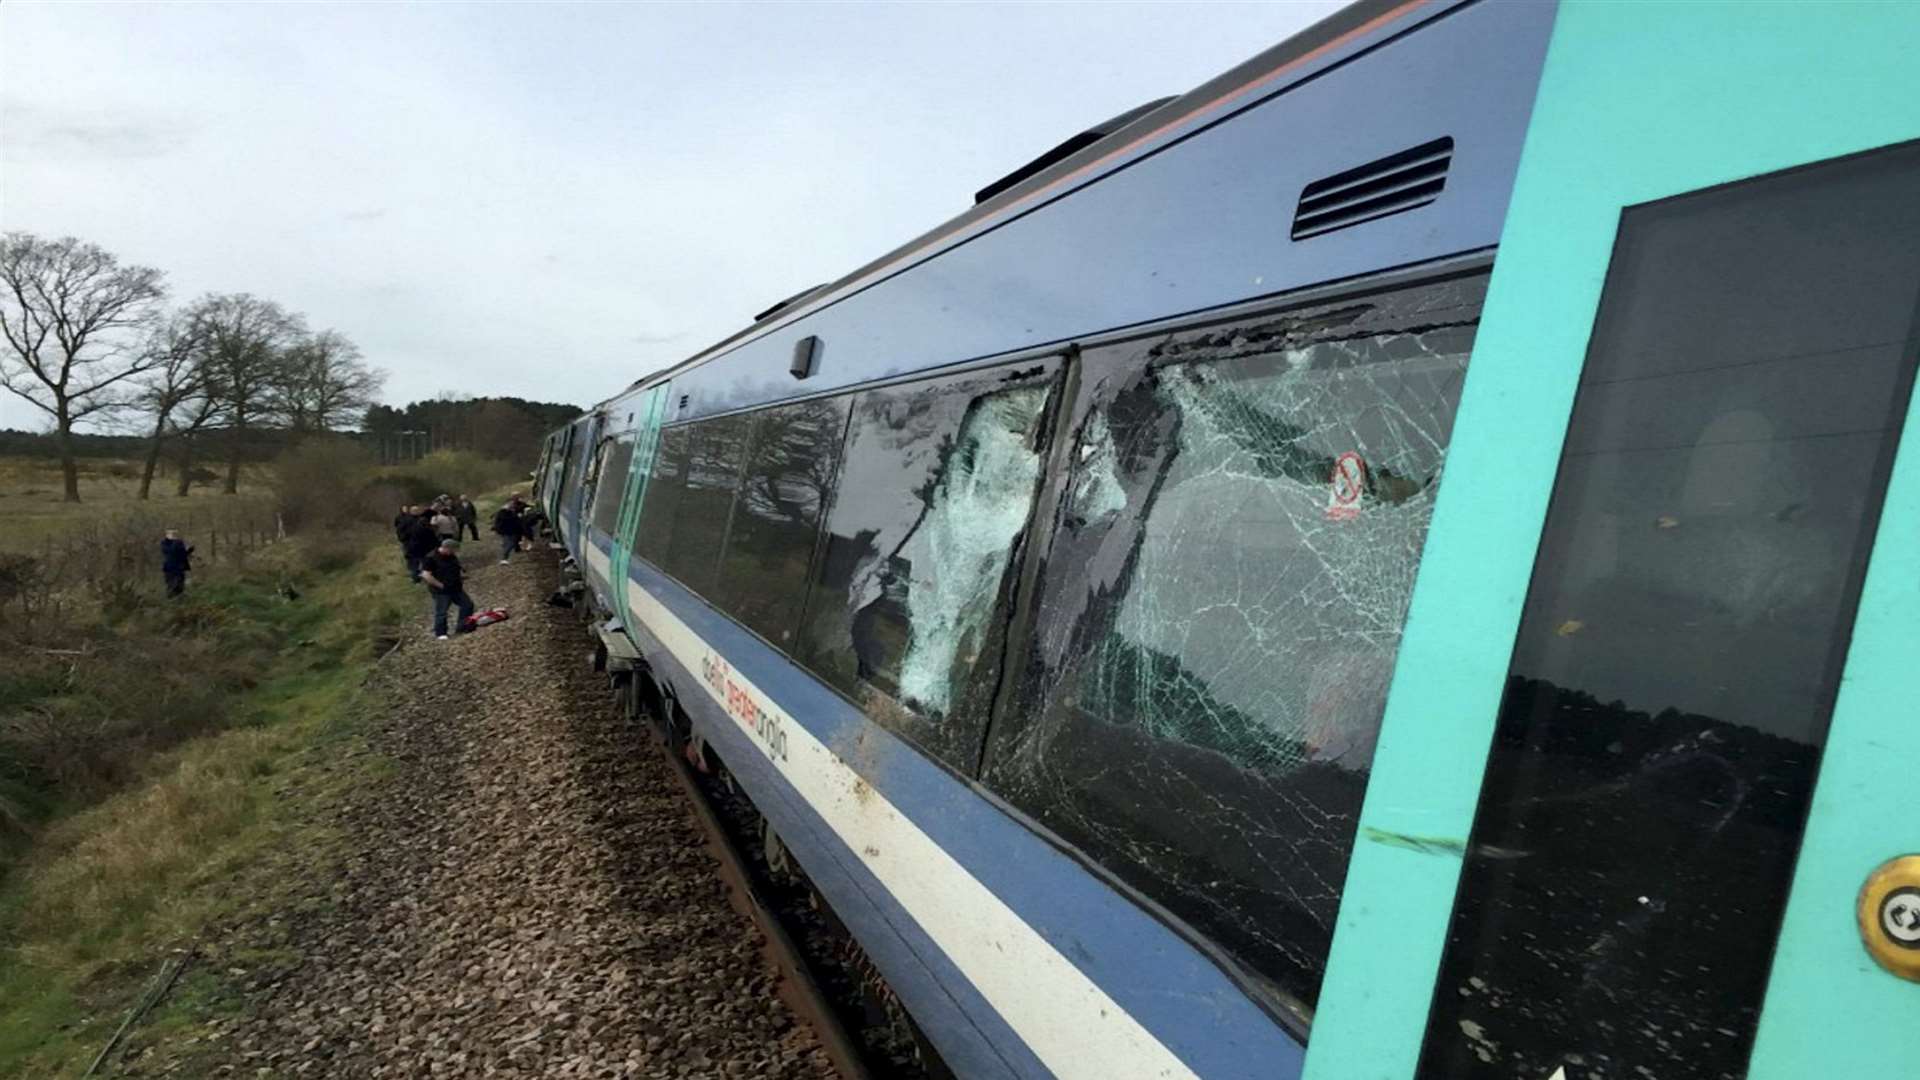 Damage to the train. Picture: SWNS